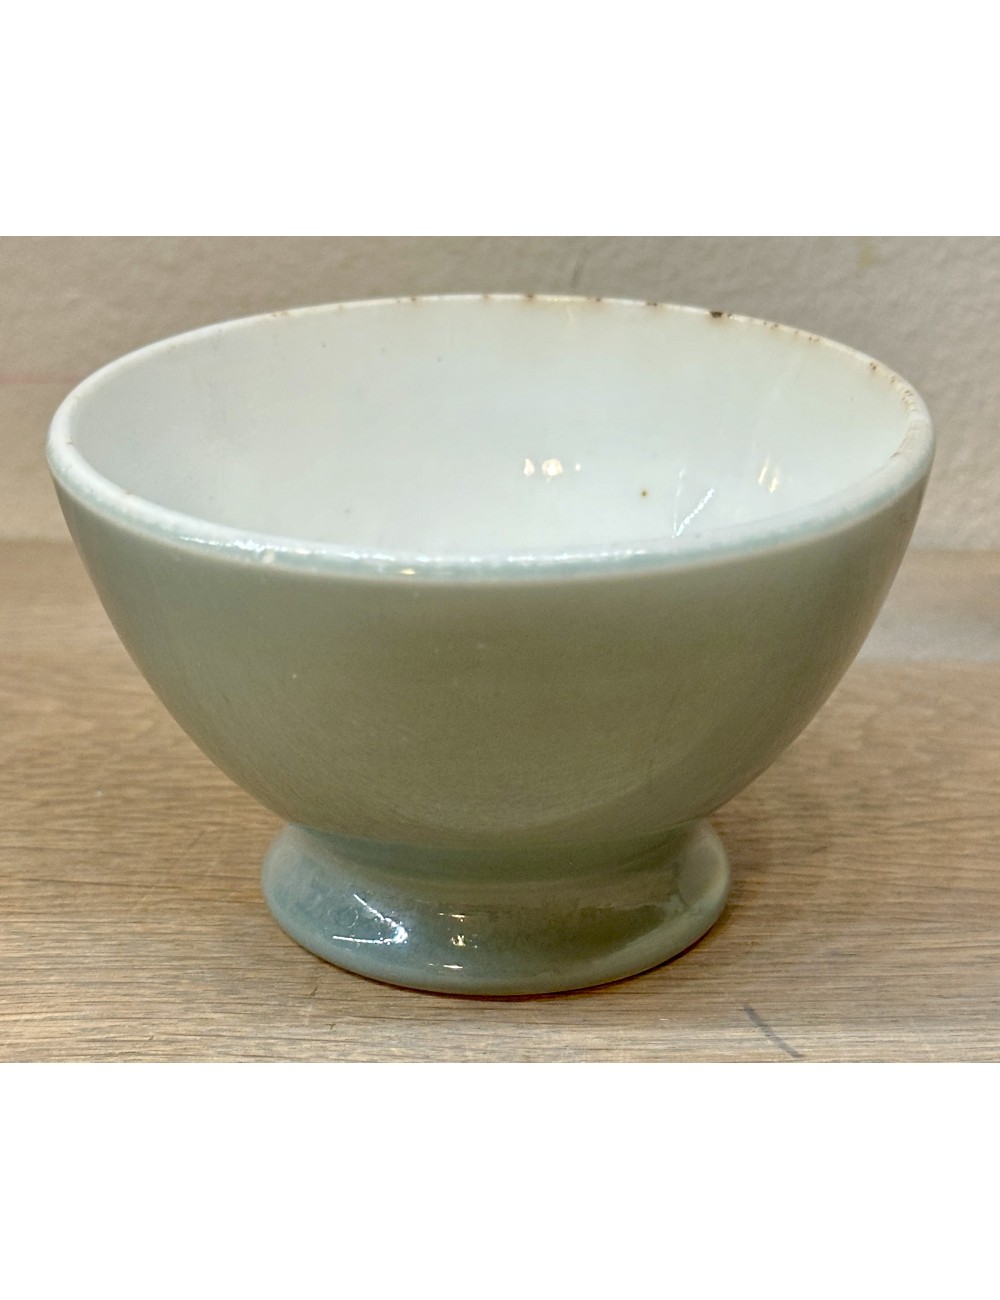 Bowl - small model - B.F.K (Boch Frères Keramis) - décor executed in gray color